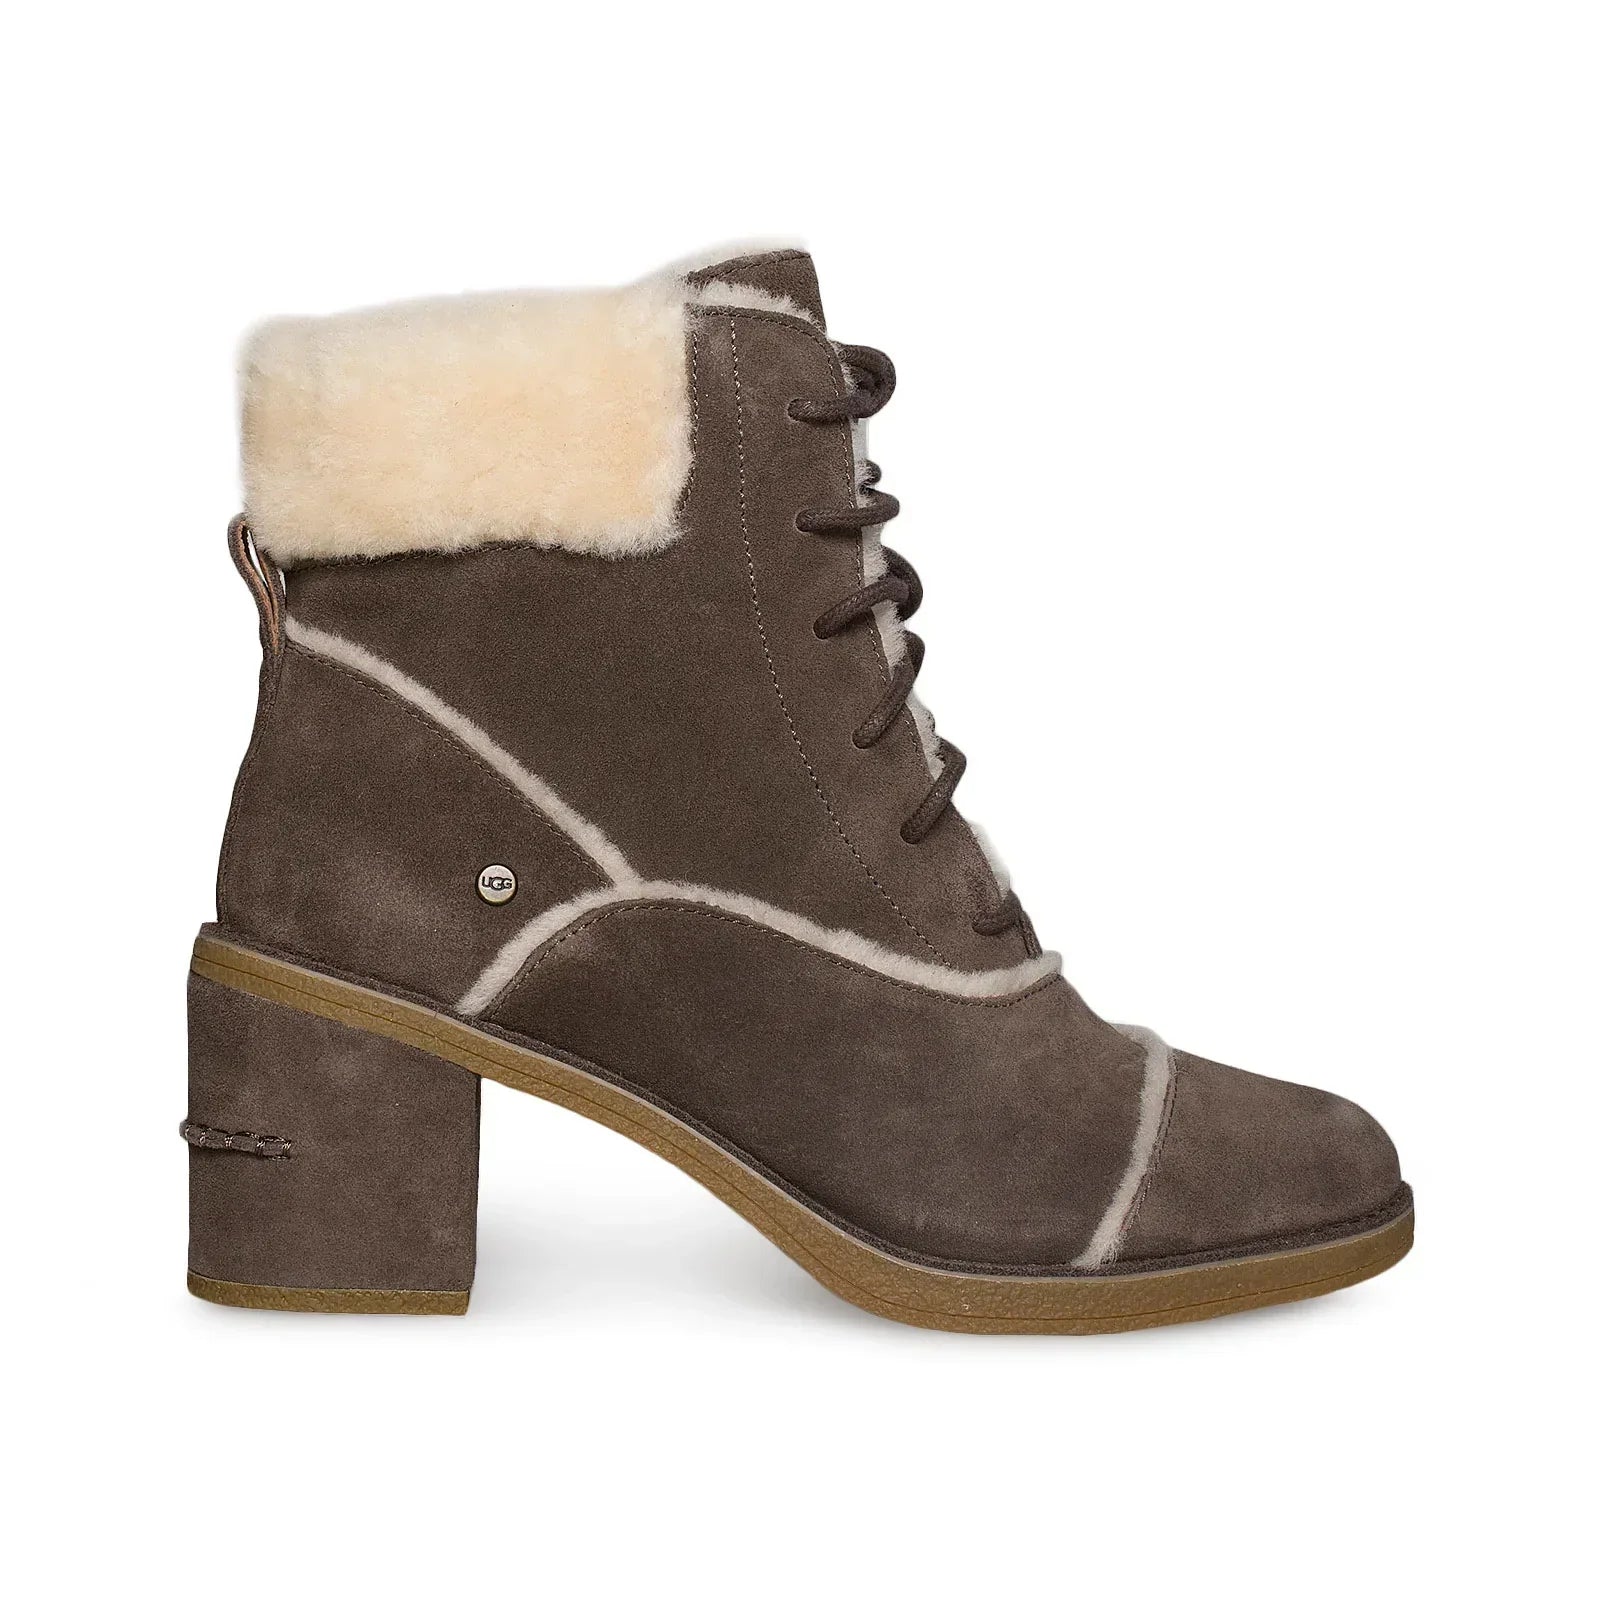 UGG Esterly Mysterious Boots - Women's